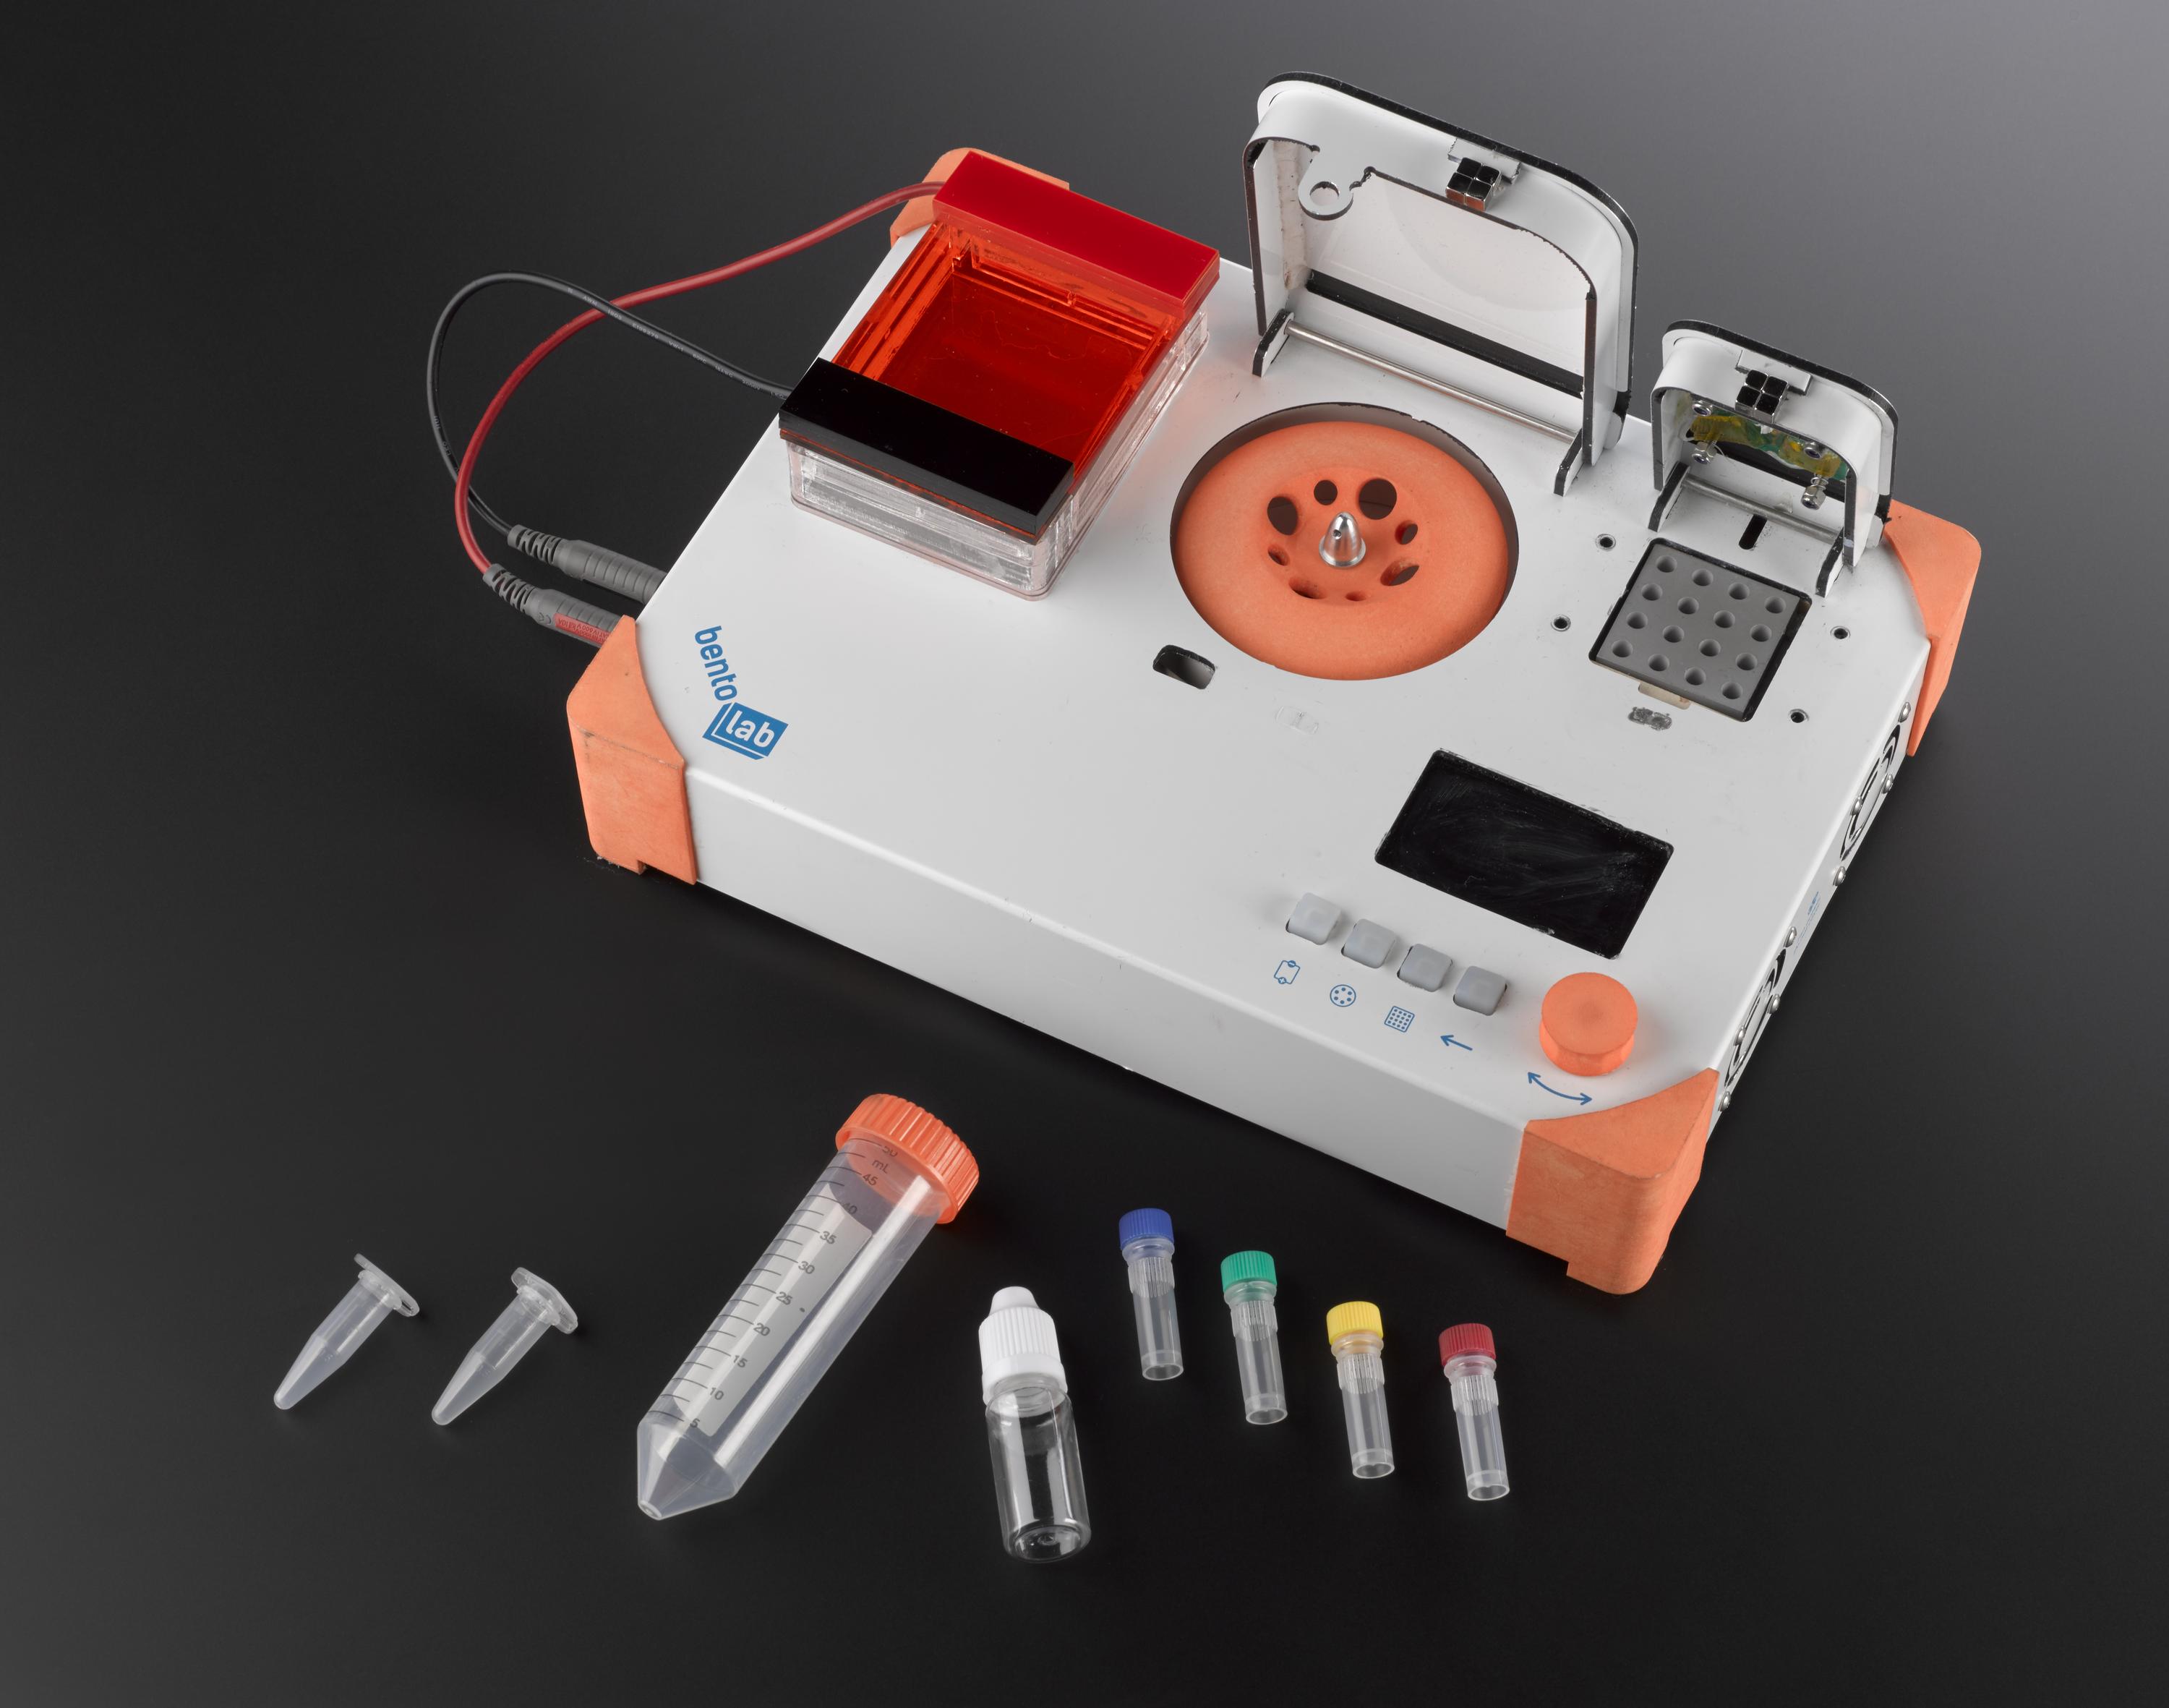 Bento Lab, a table-top laboratory encasing a PCR machine, centrifuge and gel electrophoresis unit. Can be used for forensic DNA analysis.